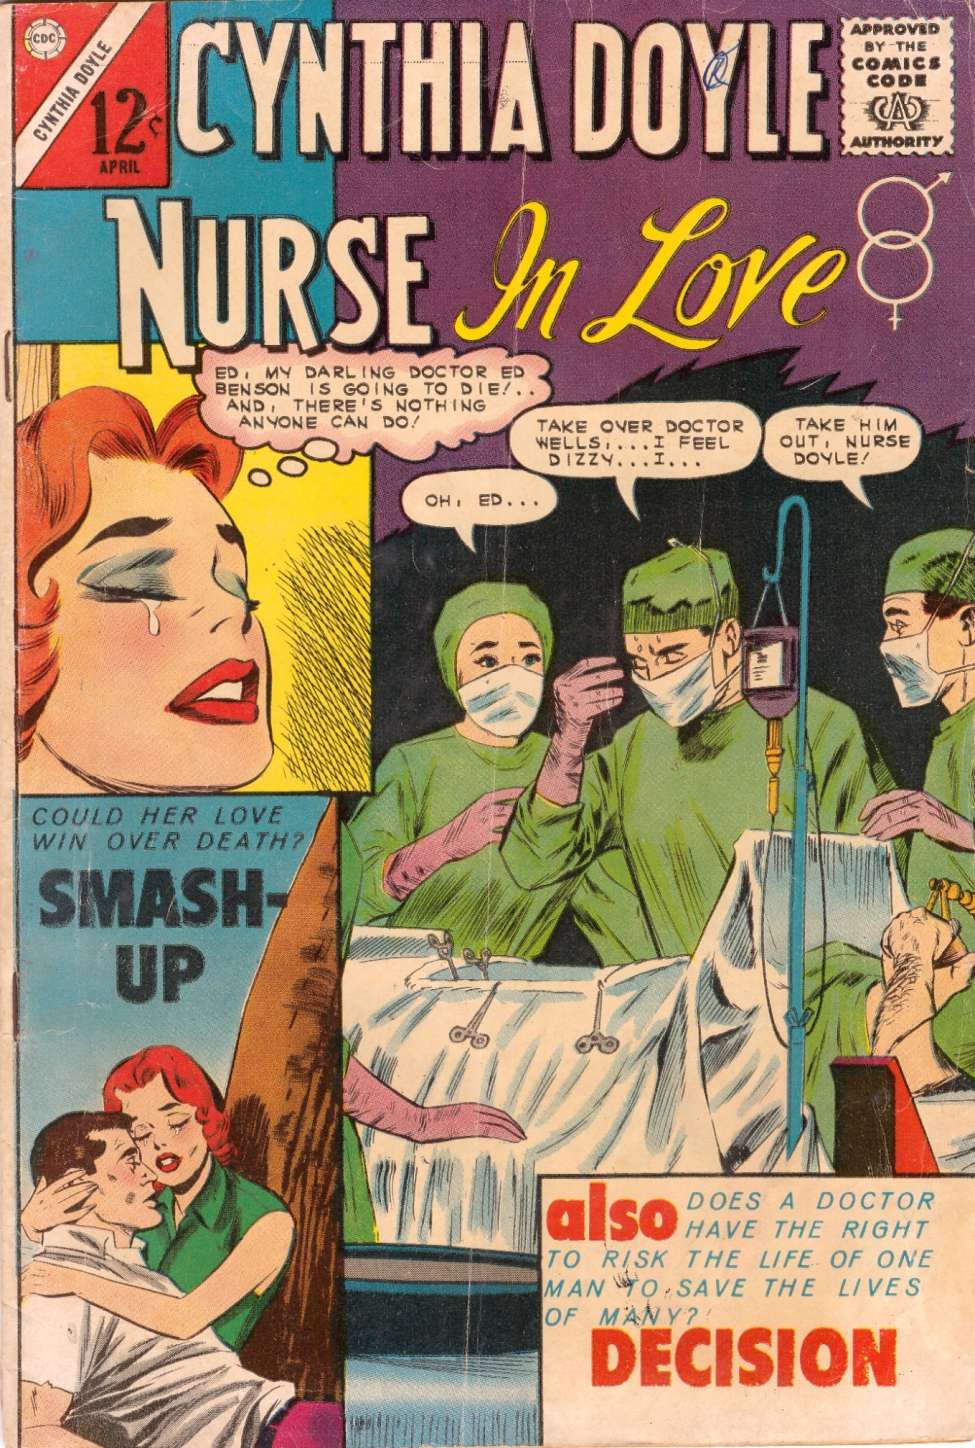 Book Cover For Cynthia Doyle, Nurse in Love 69